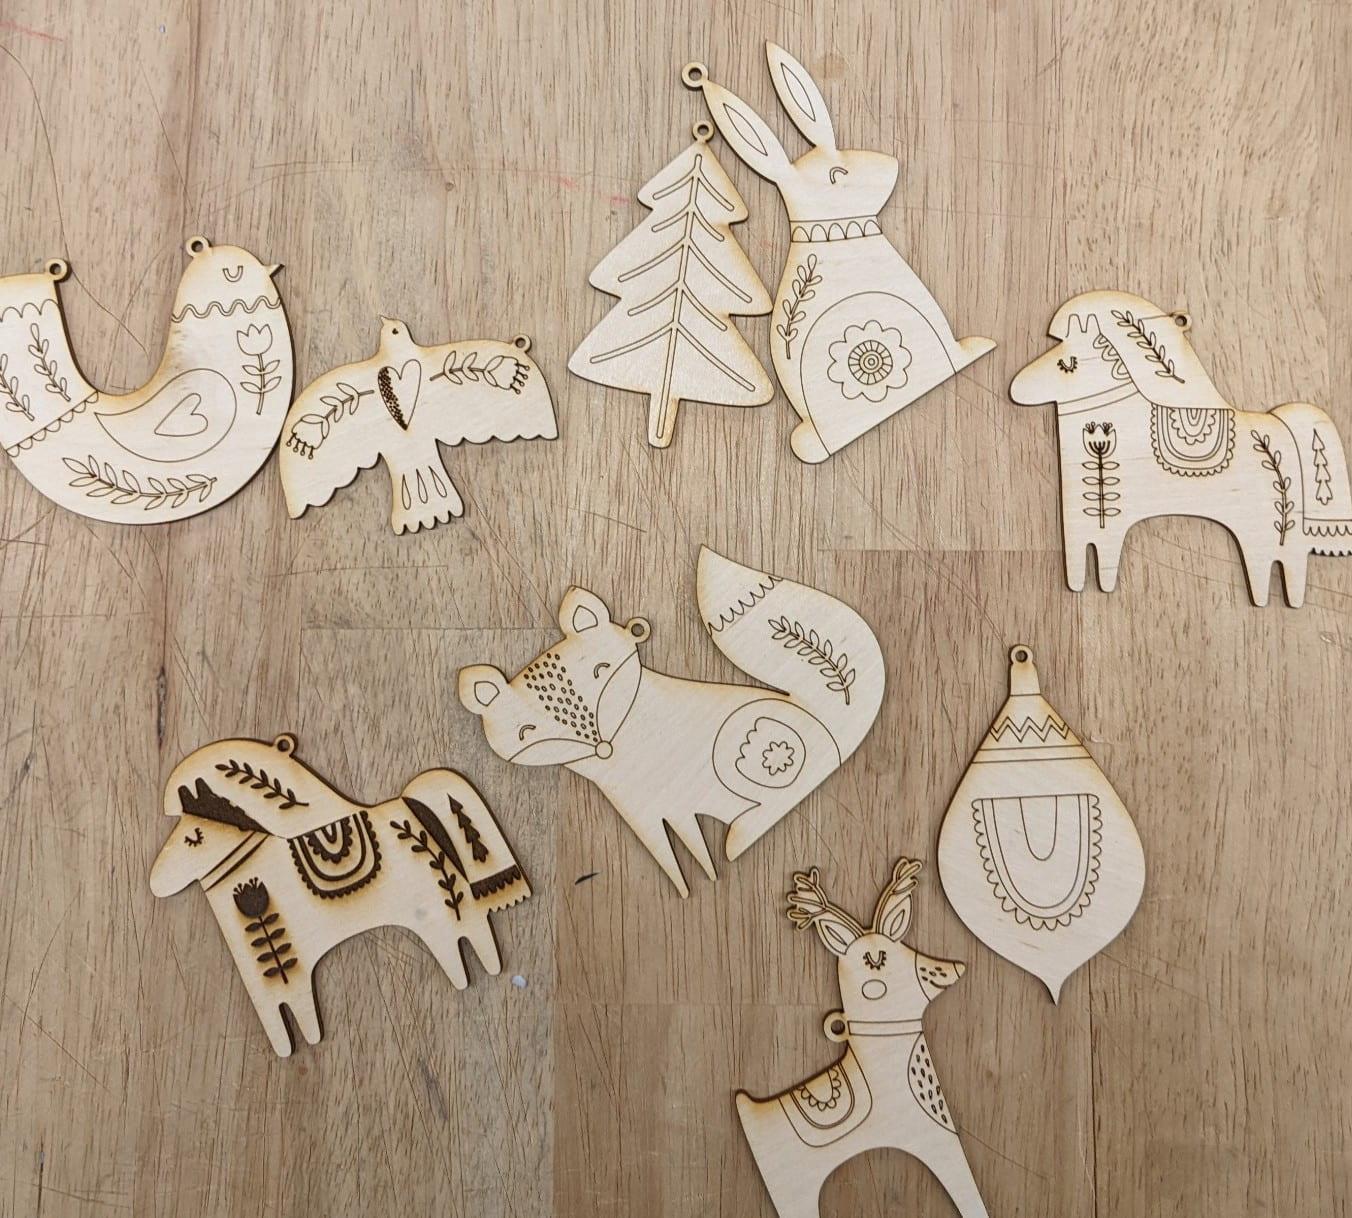 flat wood ornaments in animal and tree shapes with lasercut designs on them